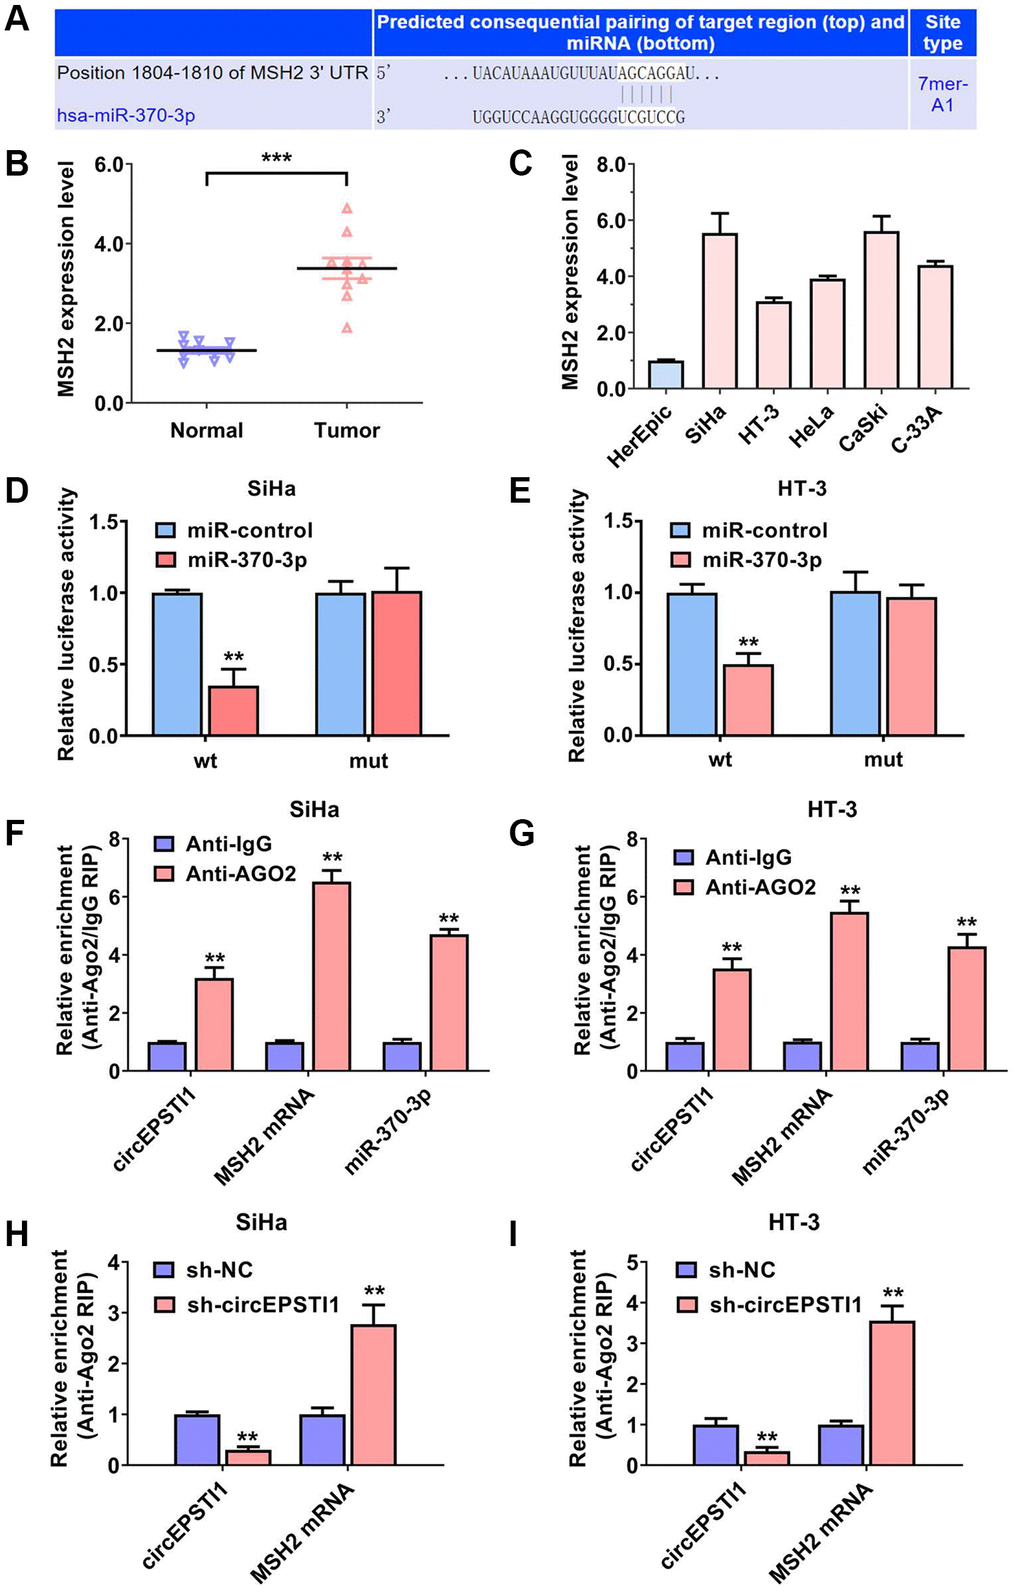 MSH2 was the downstream target of miR-370-3p in cervical cancer. (A) On the basis of the TargetScan data resource, MSH2 mRNA was the putative downstream target of miR-370-3p. (B) The contents of MSH2 mRNA in ten paired cervical cancer samples and vicinal non-malignant tissues. (C) The relative contents of MSH2 mRNA in normal HcerEpic cell line and cervical cancer cell lines. (D, E) Dual luciferase reporting experiments revealed that the relative amount of fluorescence value was reduced after transfected with miR-370-3p in SiHa, as well as HT-3 cervical cancer cell lines. (F, G) Abundance of circEPSTI1, MSH2 mRNA and miR-370-3p on the AGO2 target protein, assessed via RIP assays. (H, I) Enrichment of AGO2 protein to circEPSTI1 was diminished whilst MSH2 mRNA was increased after silencing of circEPSTI1 in SiHa along with HT-3 cervical cancer cell lines.